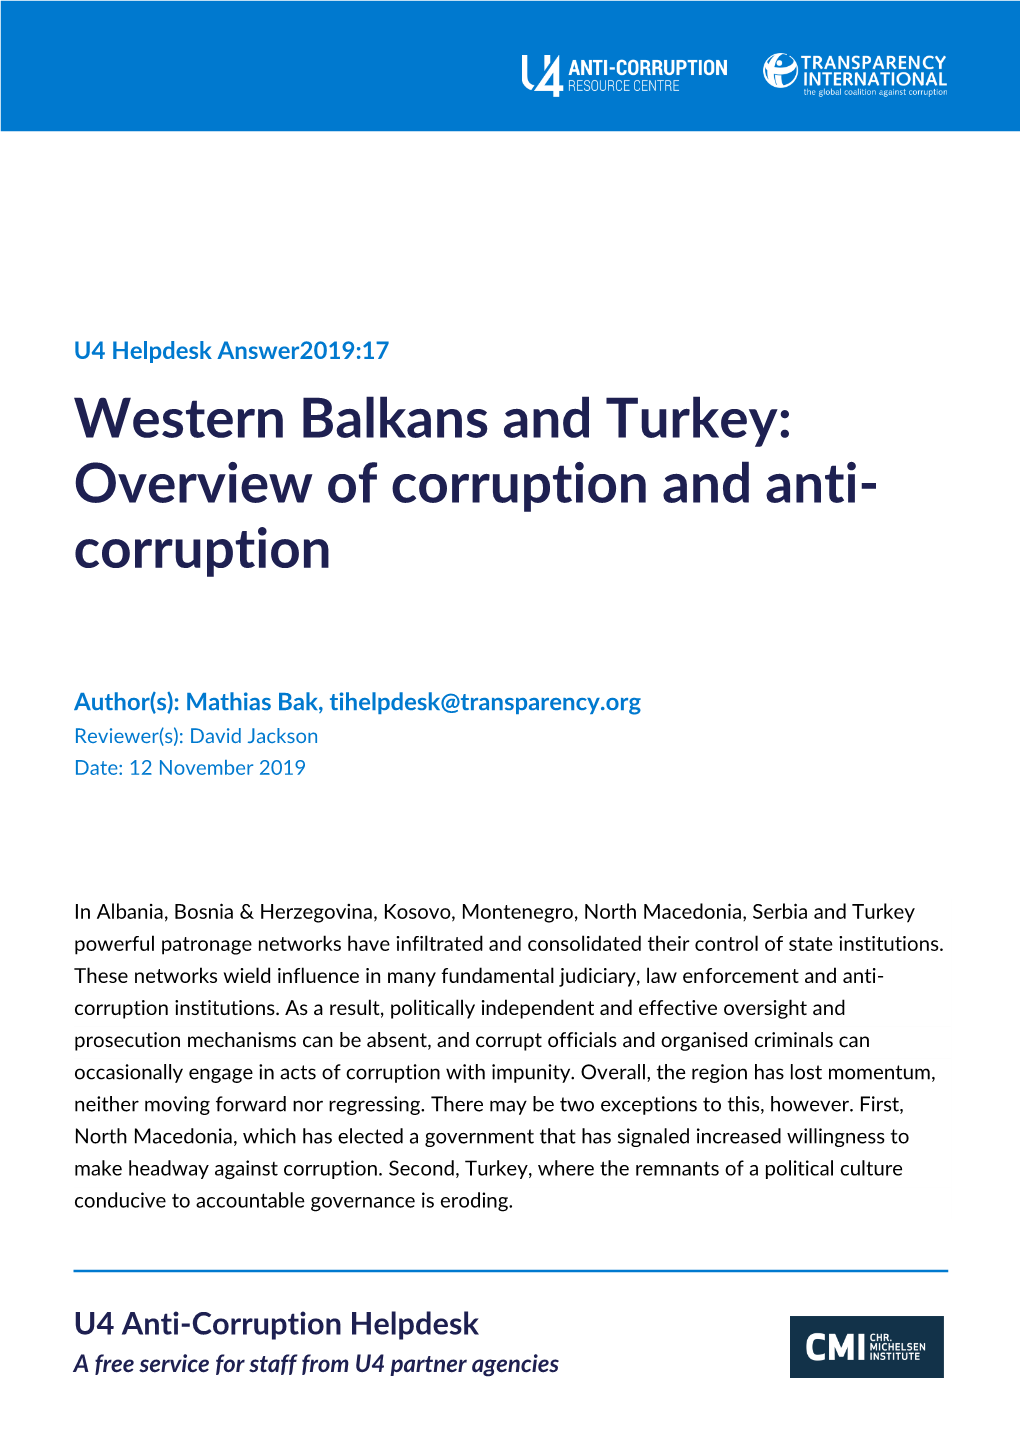 Western Balkans and Turkey: Overview of Corruption and Anti